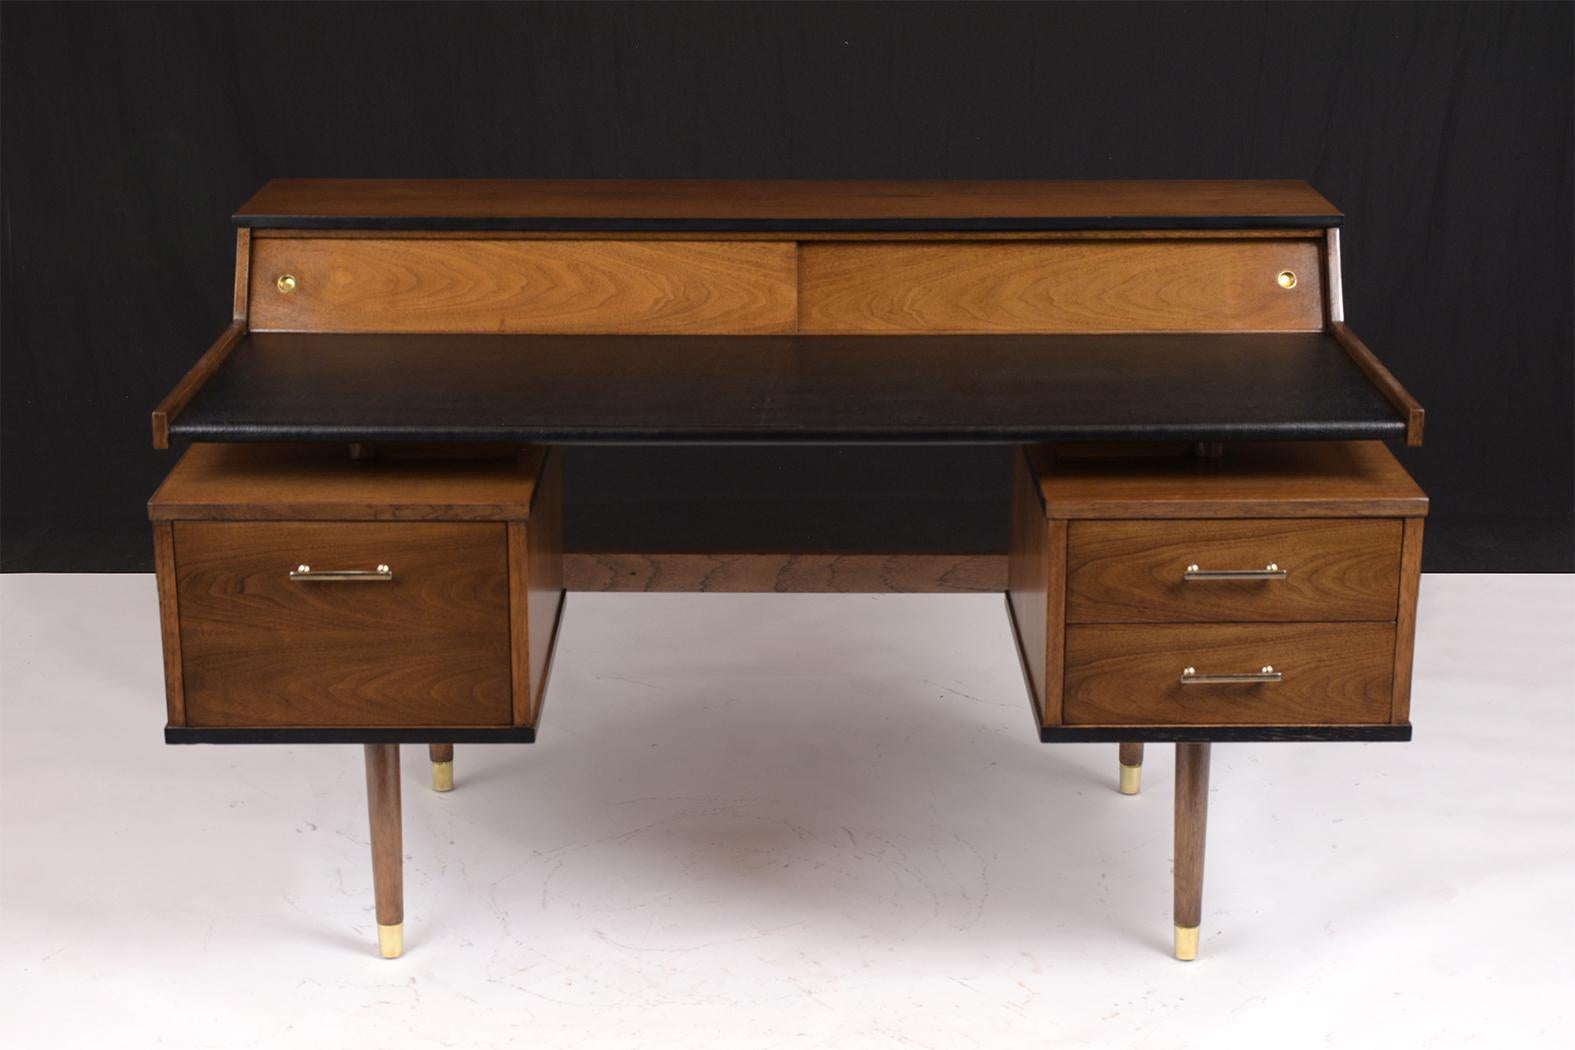 This Mid Century Modern Desk, Model K80 by John Van Koert for Drexel is made out of walnut wood and has been professionally restored. This Floating Desk has been stained a new dark walnut color with a lacquered finish and flat moldings finished in